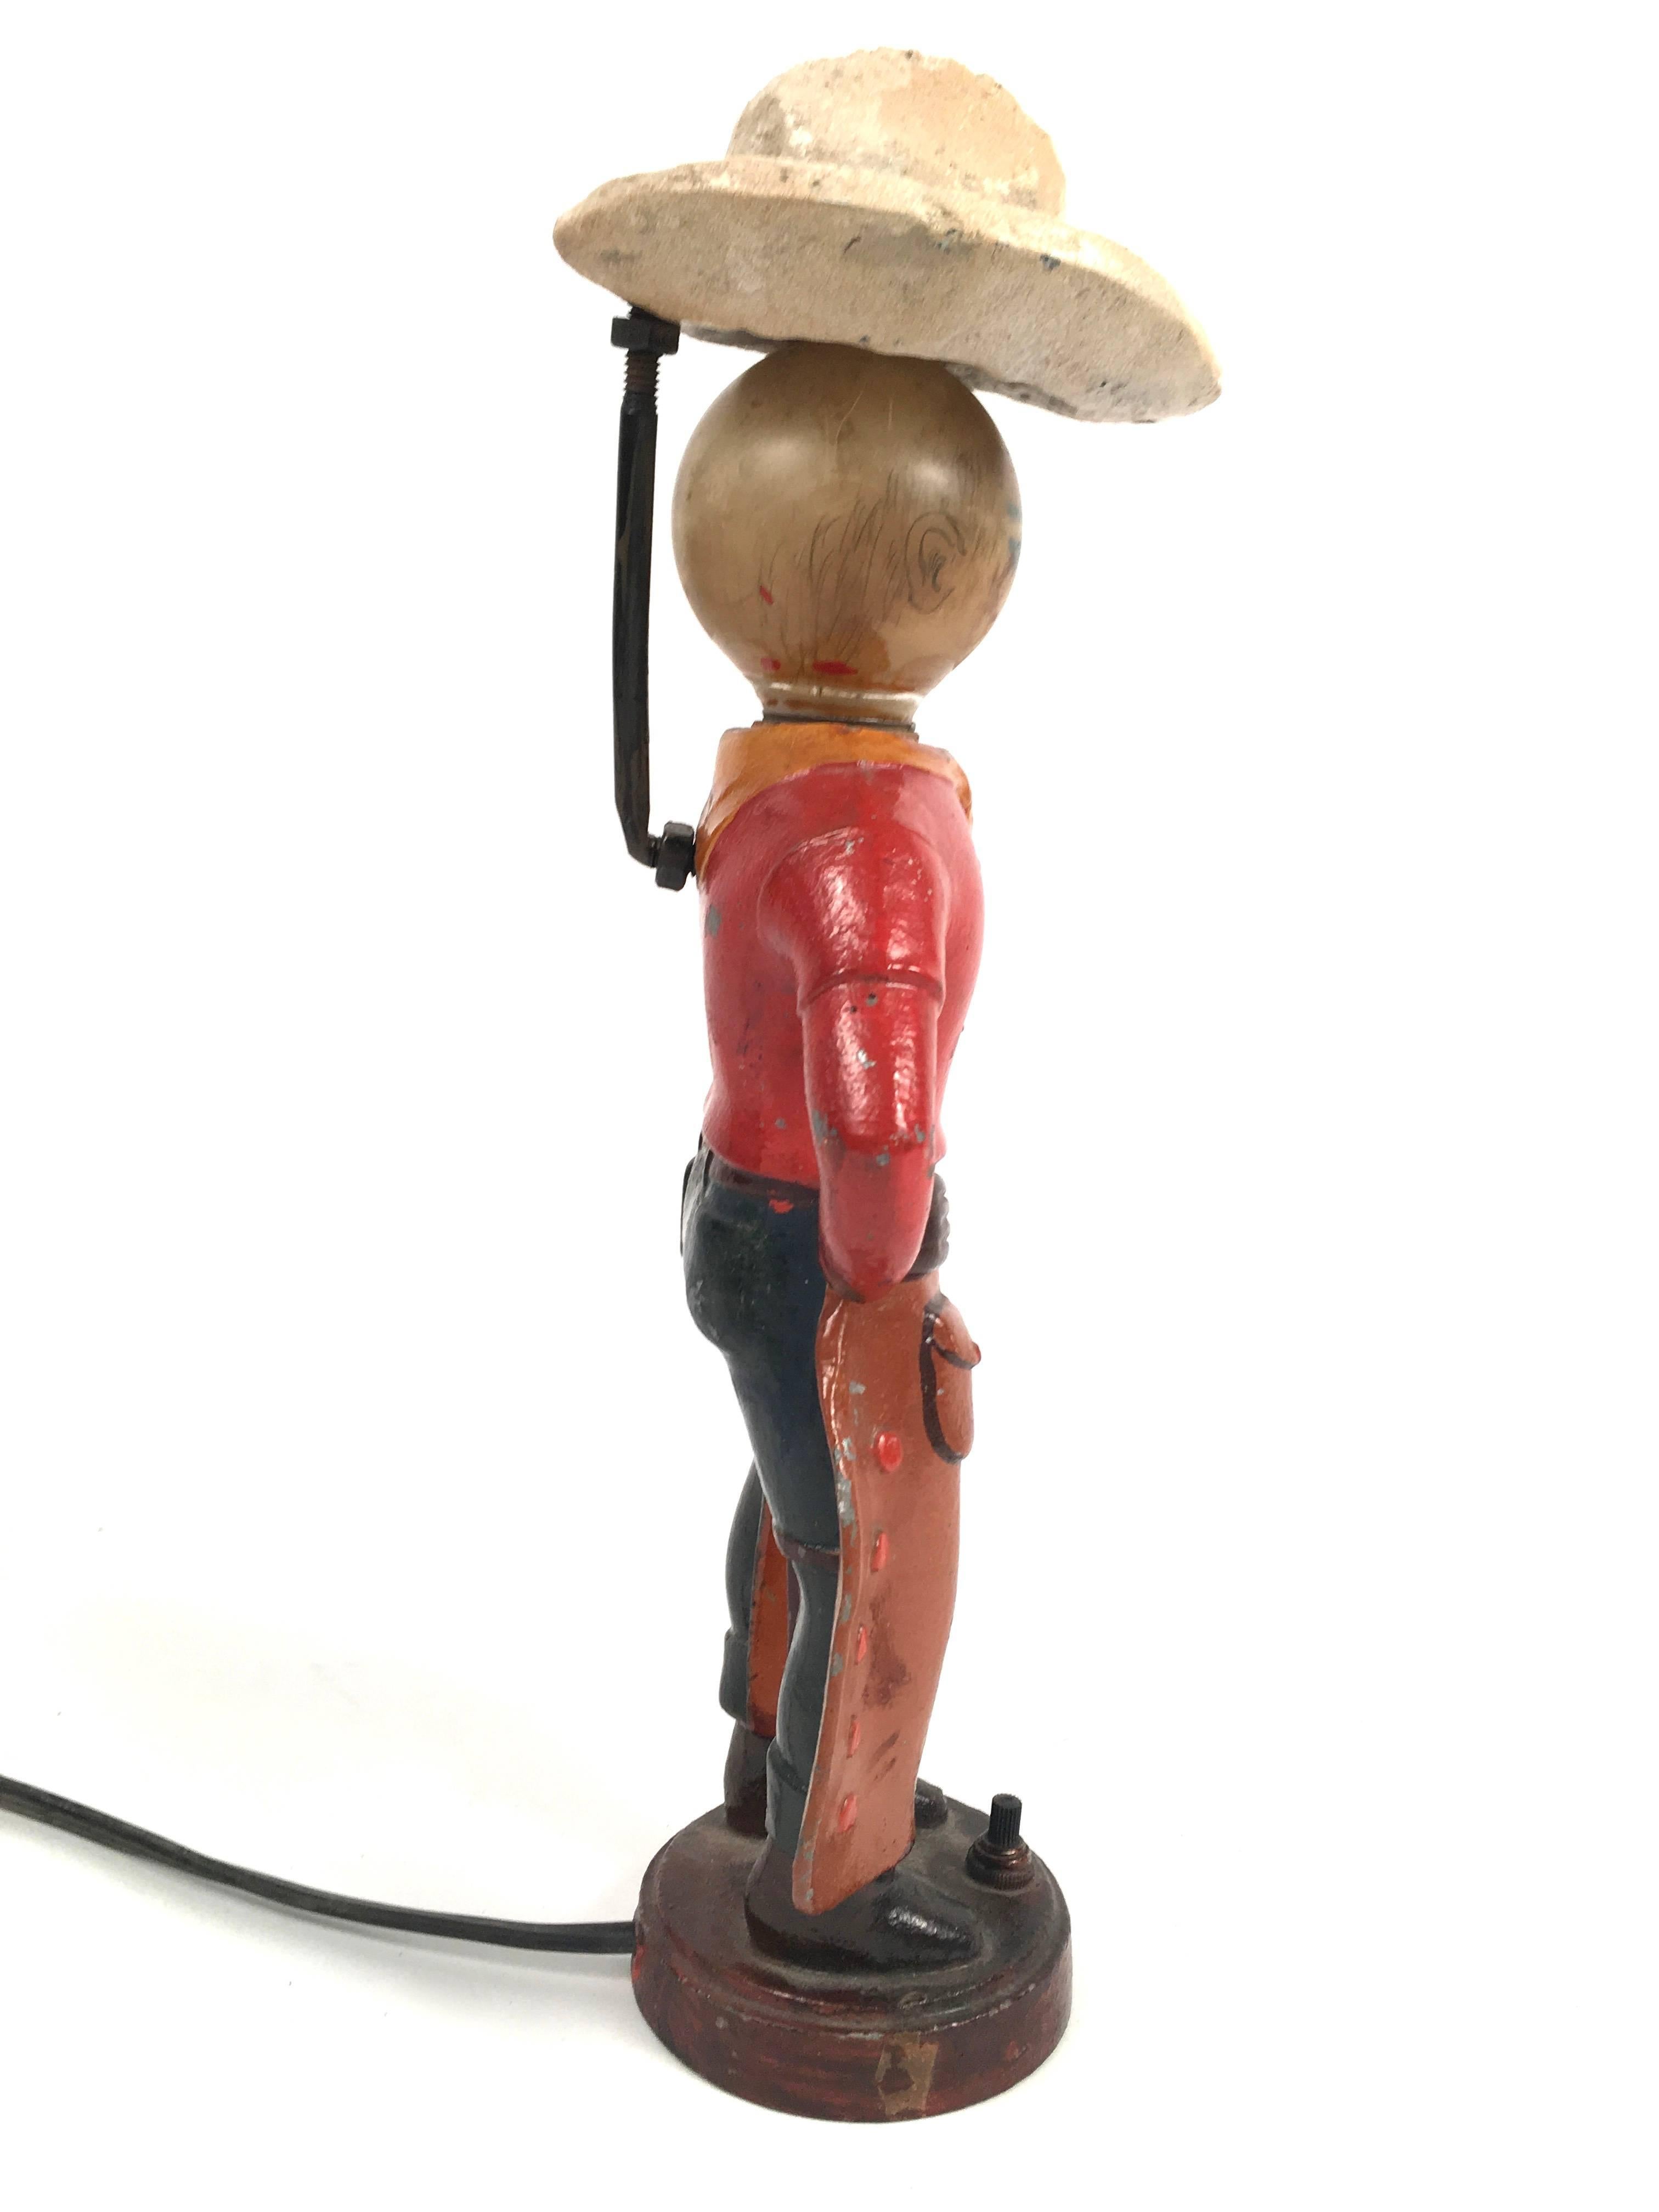 A playful painted cast iron vintage figural cowboy lamp, American, circa 1930s, with a hat that pivots sideways for accessing the lightbulb which is hand decorated with facial features, the cowboy with hands on his hips, wearing a red shirt with